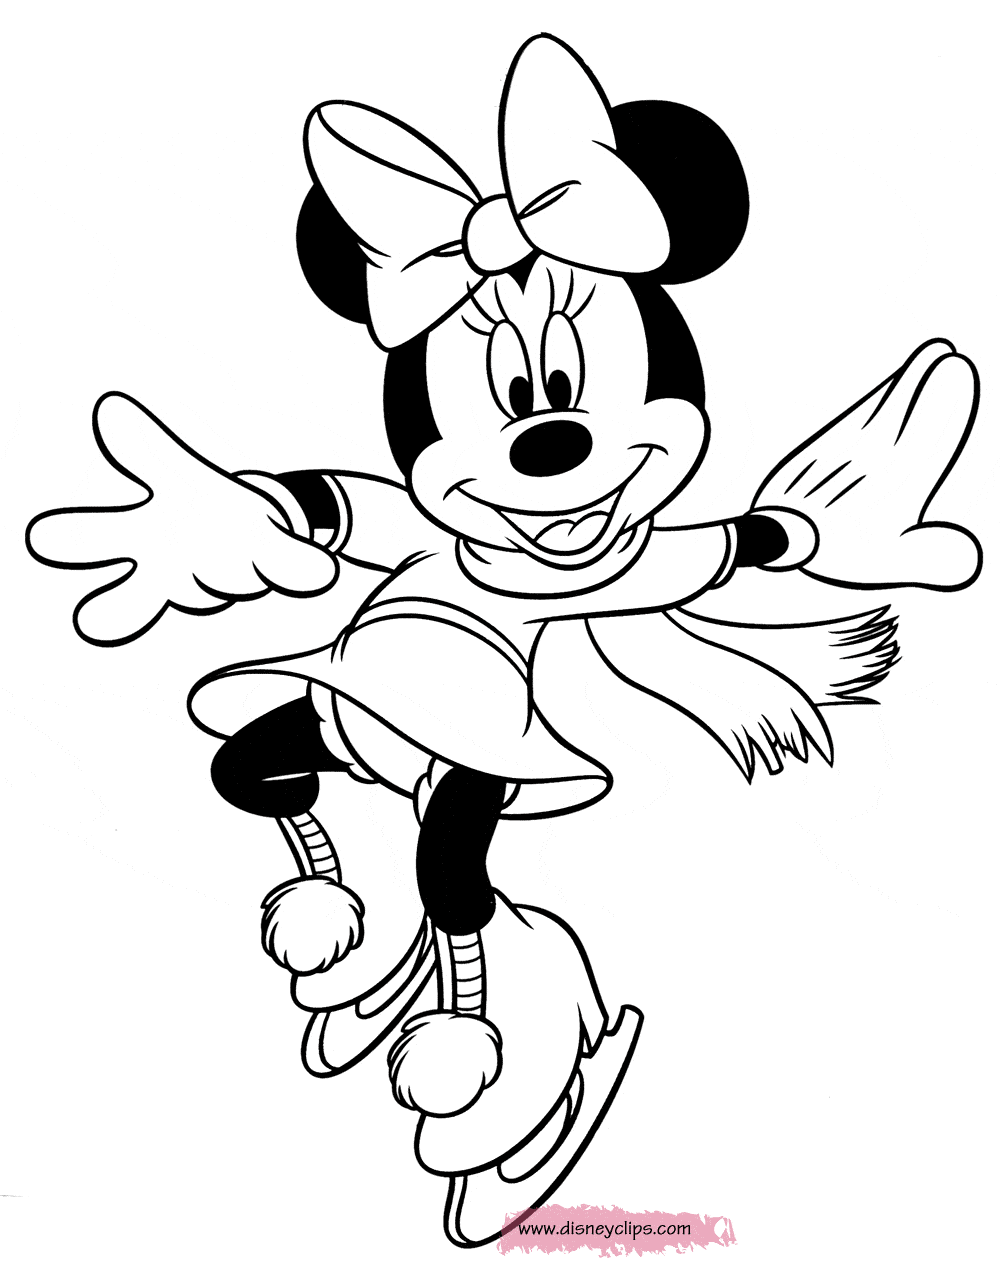 21+ Coloring Pages Minnie Mouse Pics – Tunnel To Viaduct Run